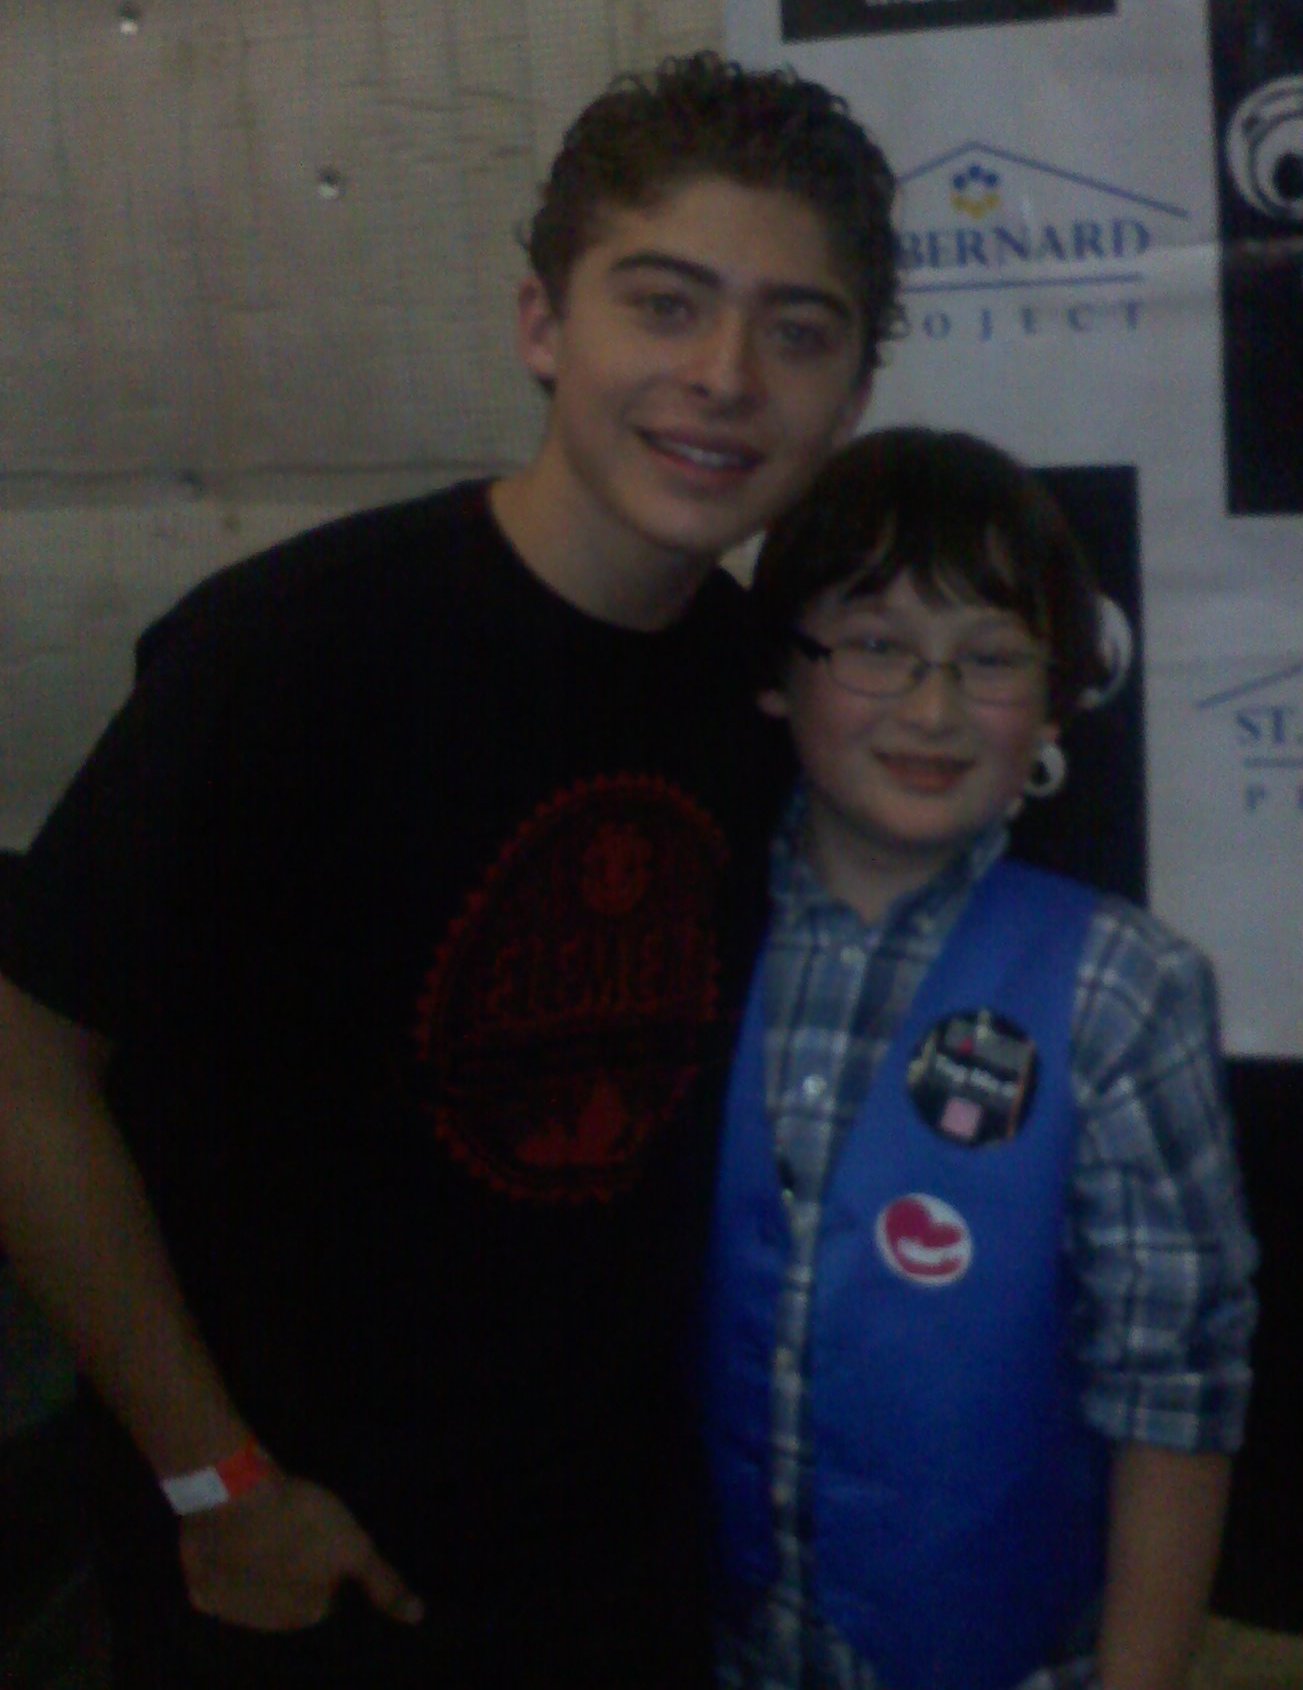 Matthew with Ryan Ochoa (Disney's Pair of Kings)at the Connected Gifting Suite, in Los Angeles, CA, November 2011.